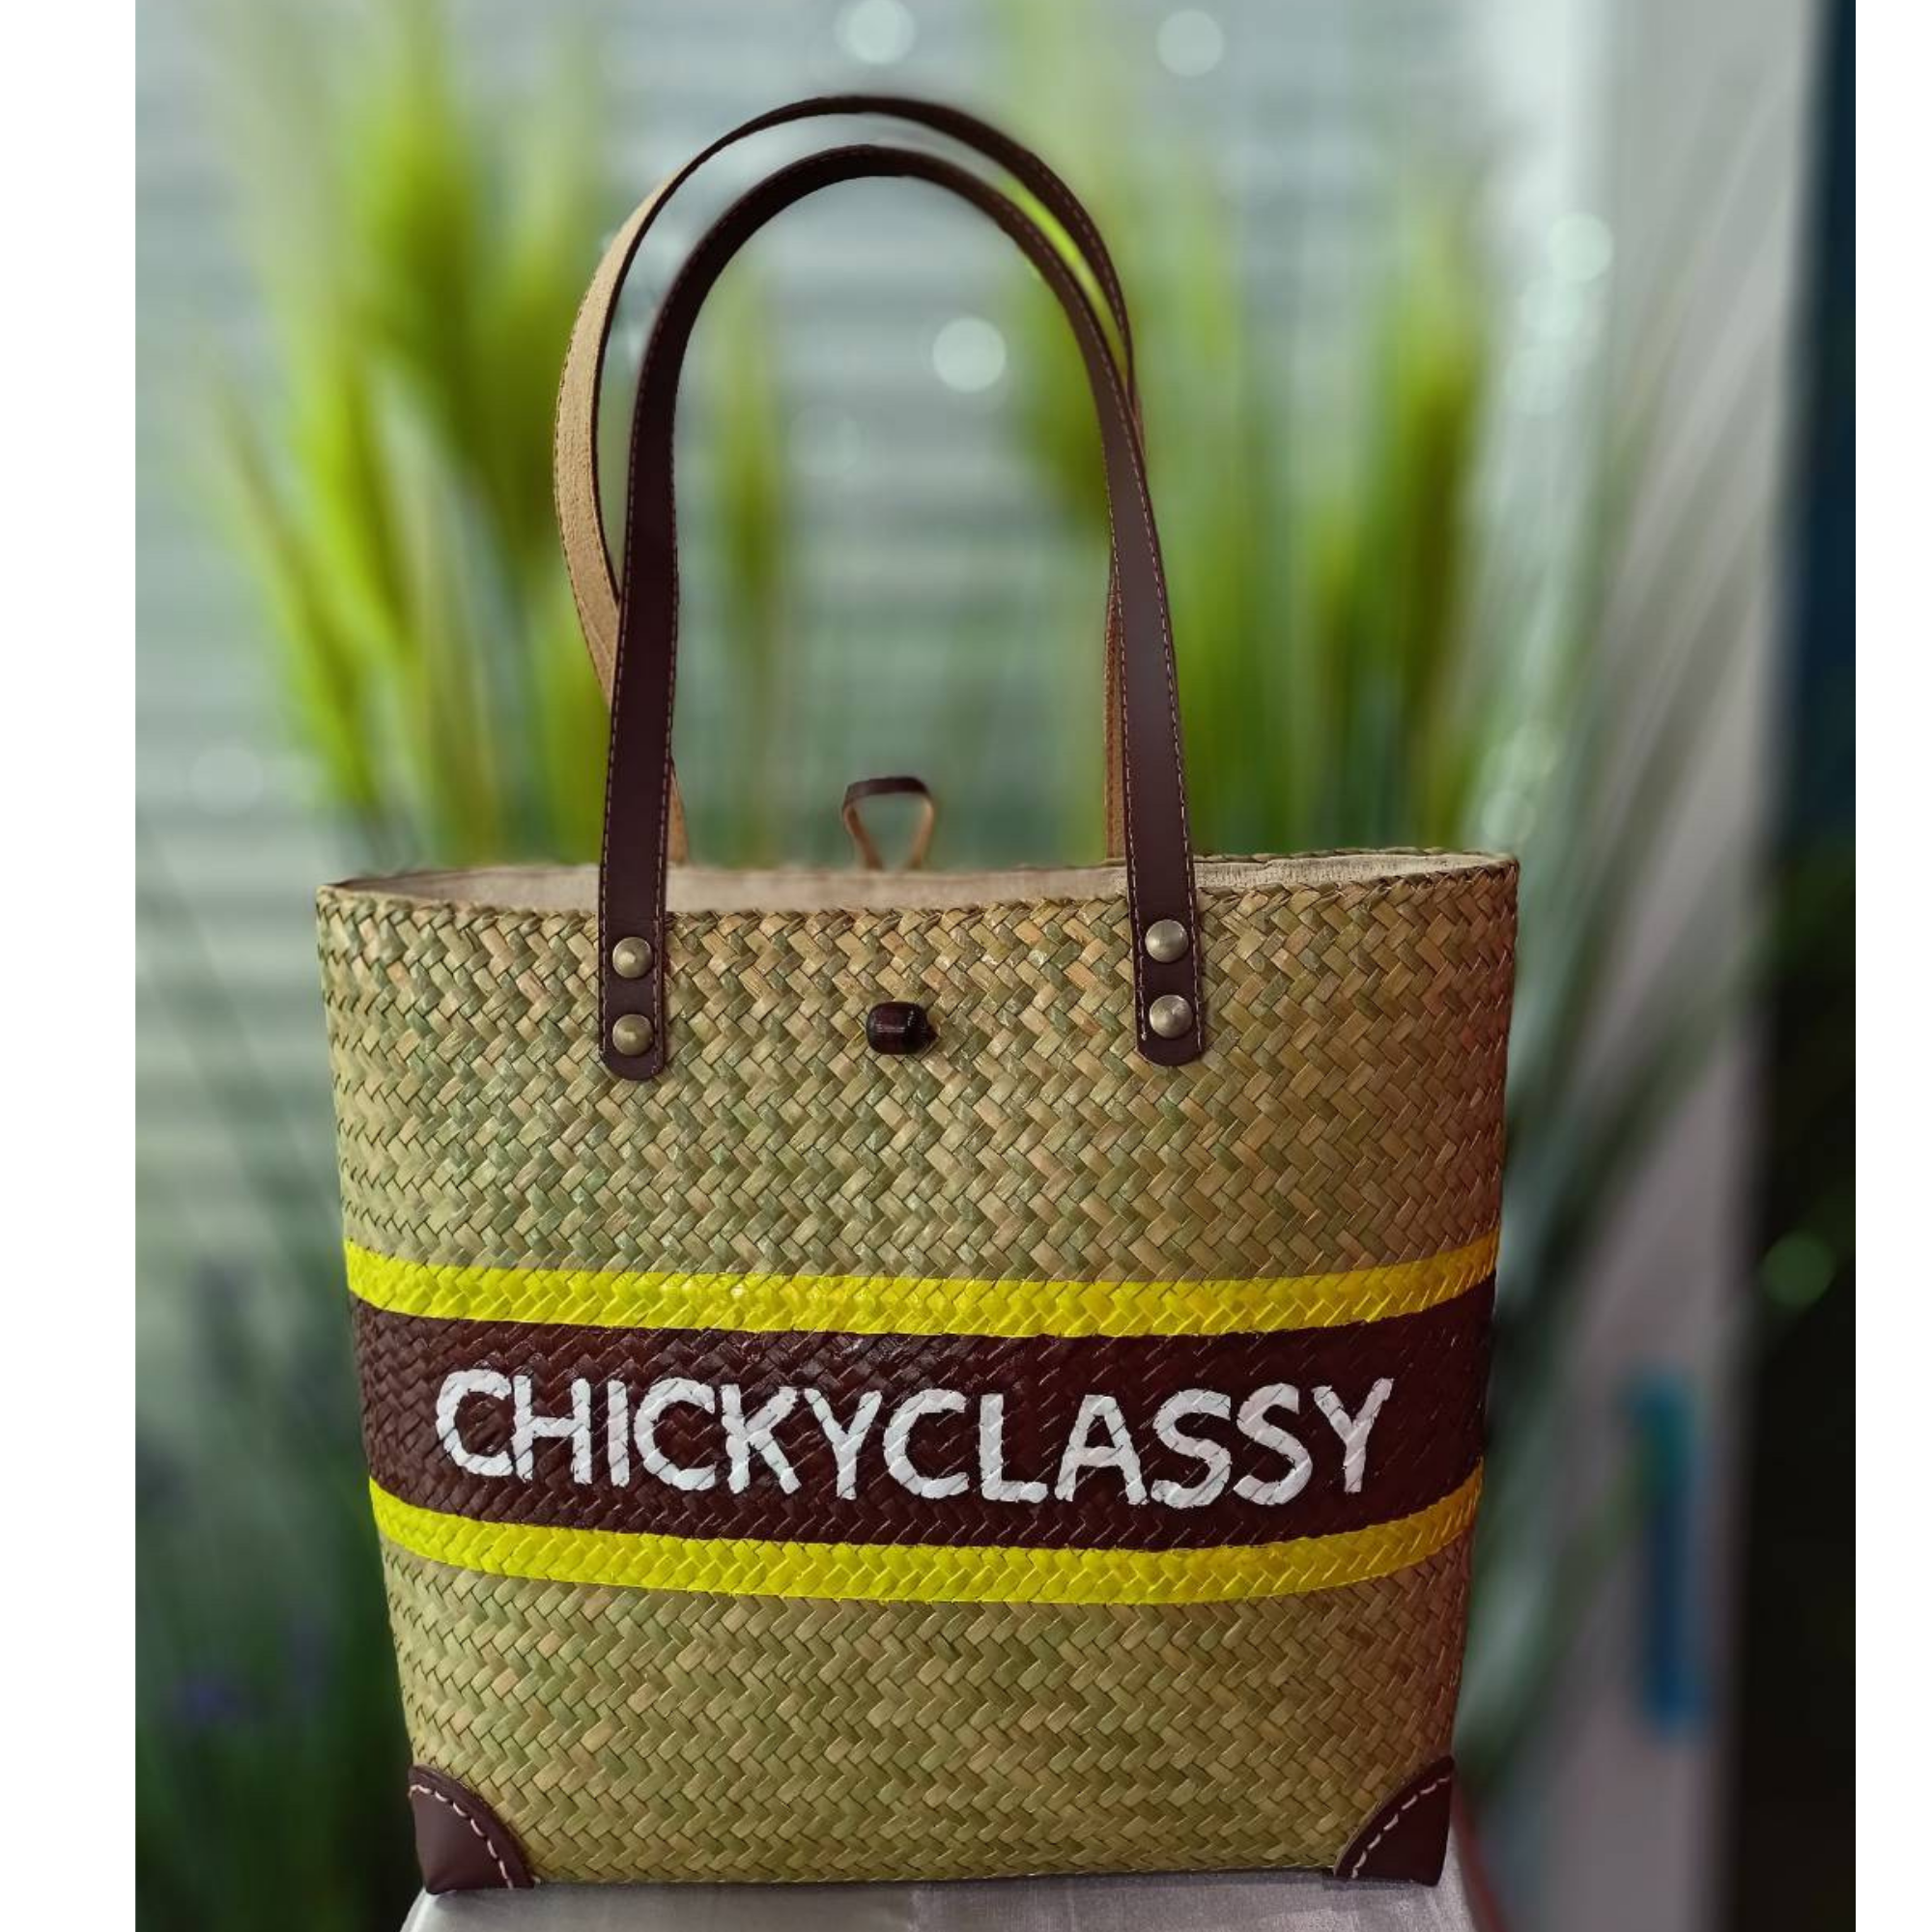 Chicky Classy Home made customize with leather hand bags